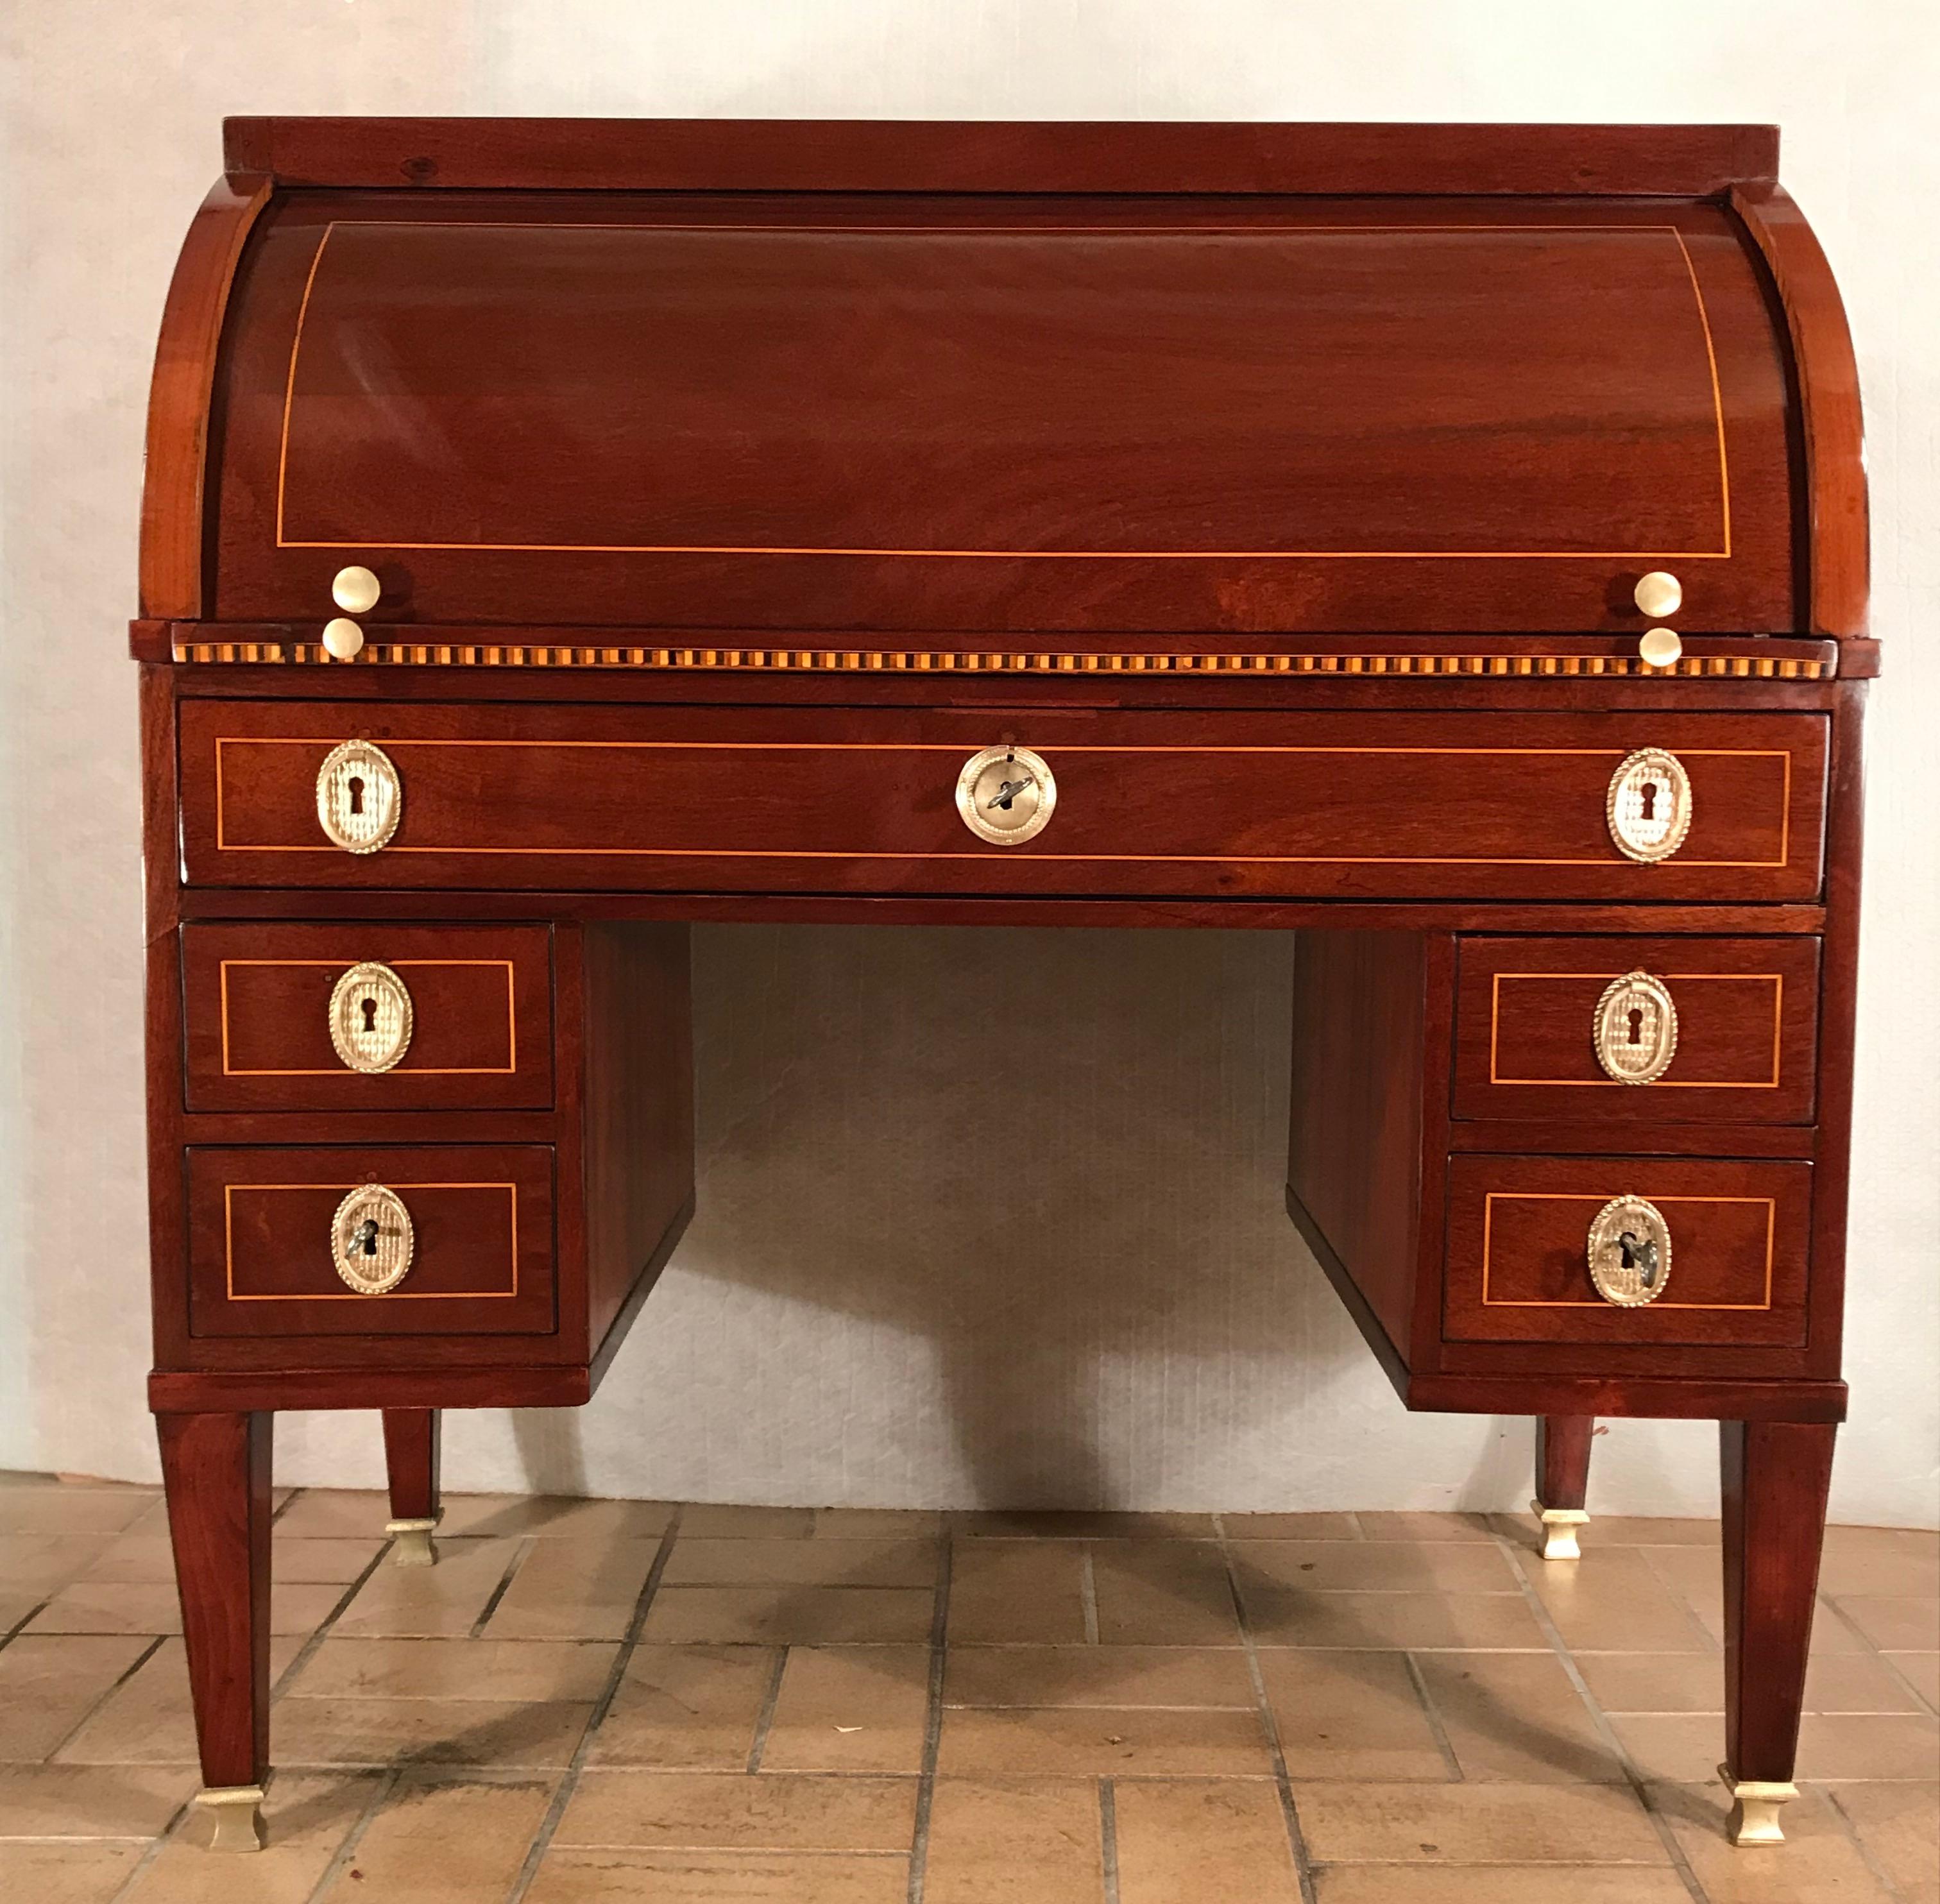 Louis XVI Rolltop or cylinder desk, France, 1780. This original Louis XVI cylinder desk has an elegant mahogany veneer with satinwood inlays. It has five exterior drawers. Behind the cylinder top are six small drawers and an open compartment. The